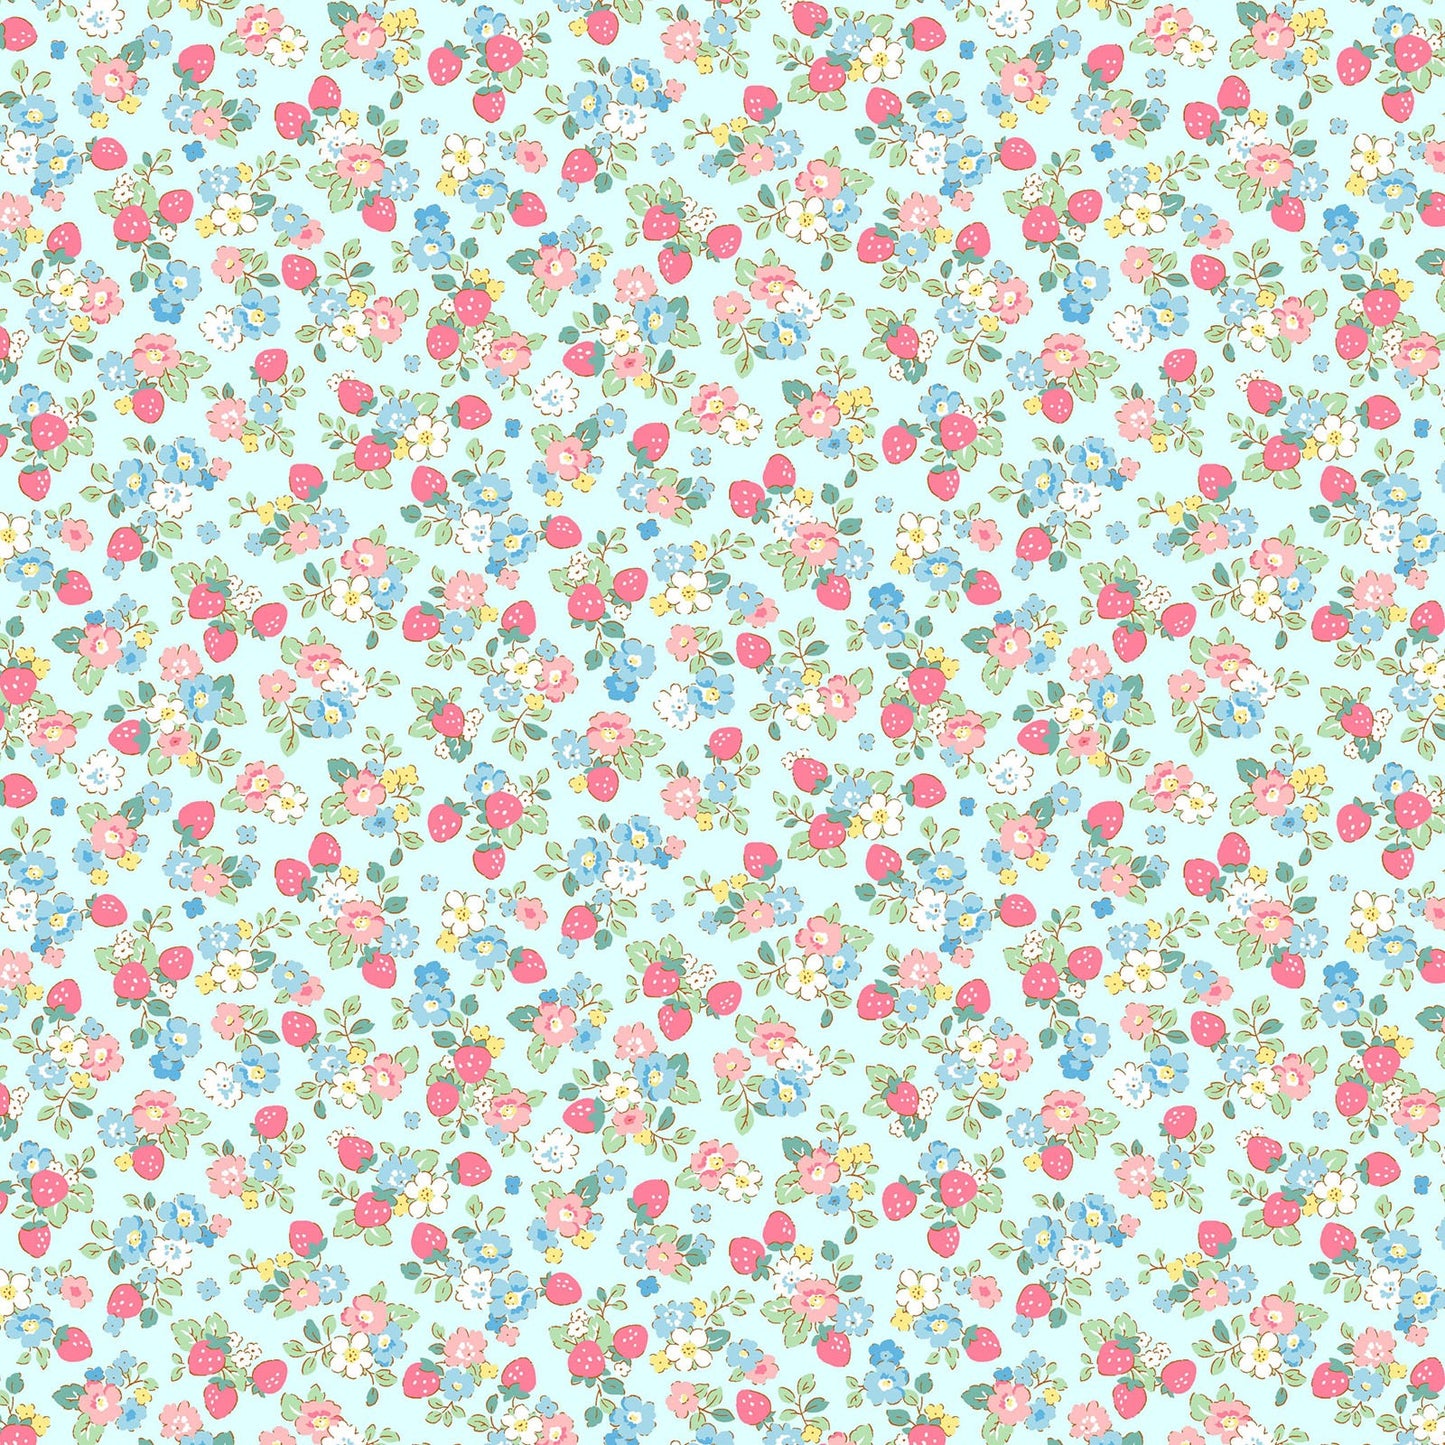 Find Me Strawberry Field Light Blue Mint Broadcloth Cosmo 1D Japanese Fabric